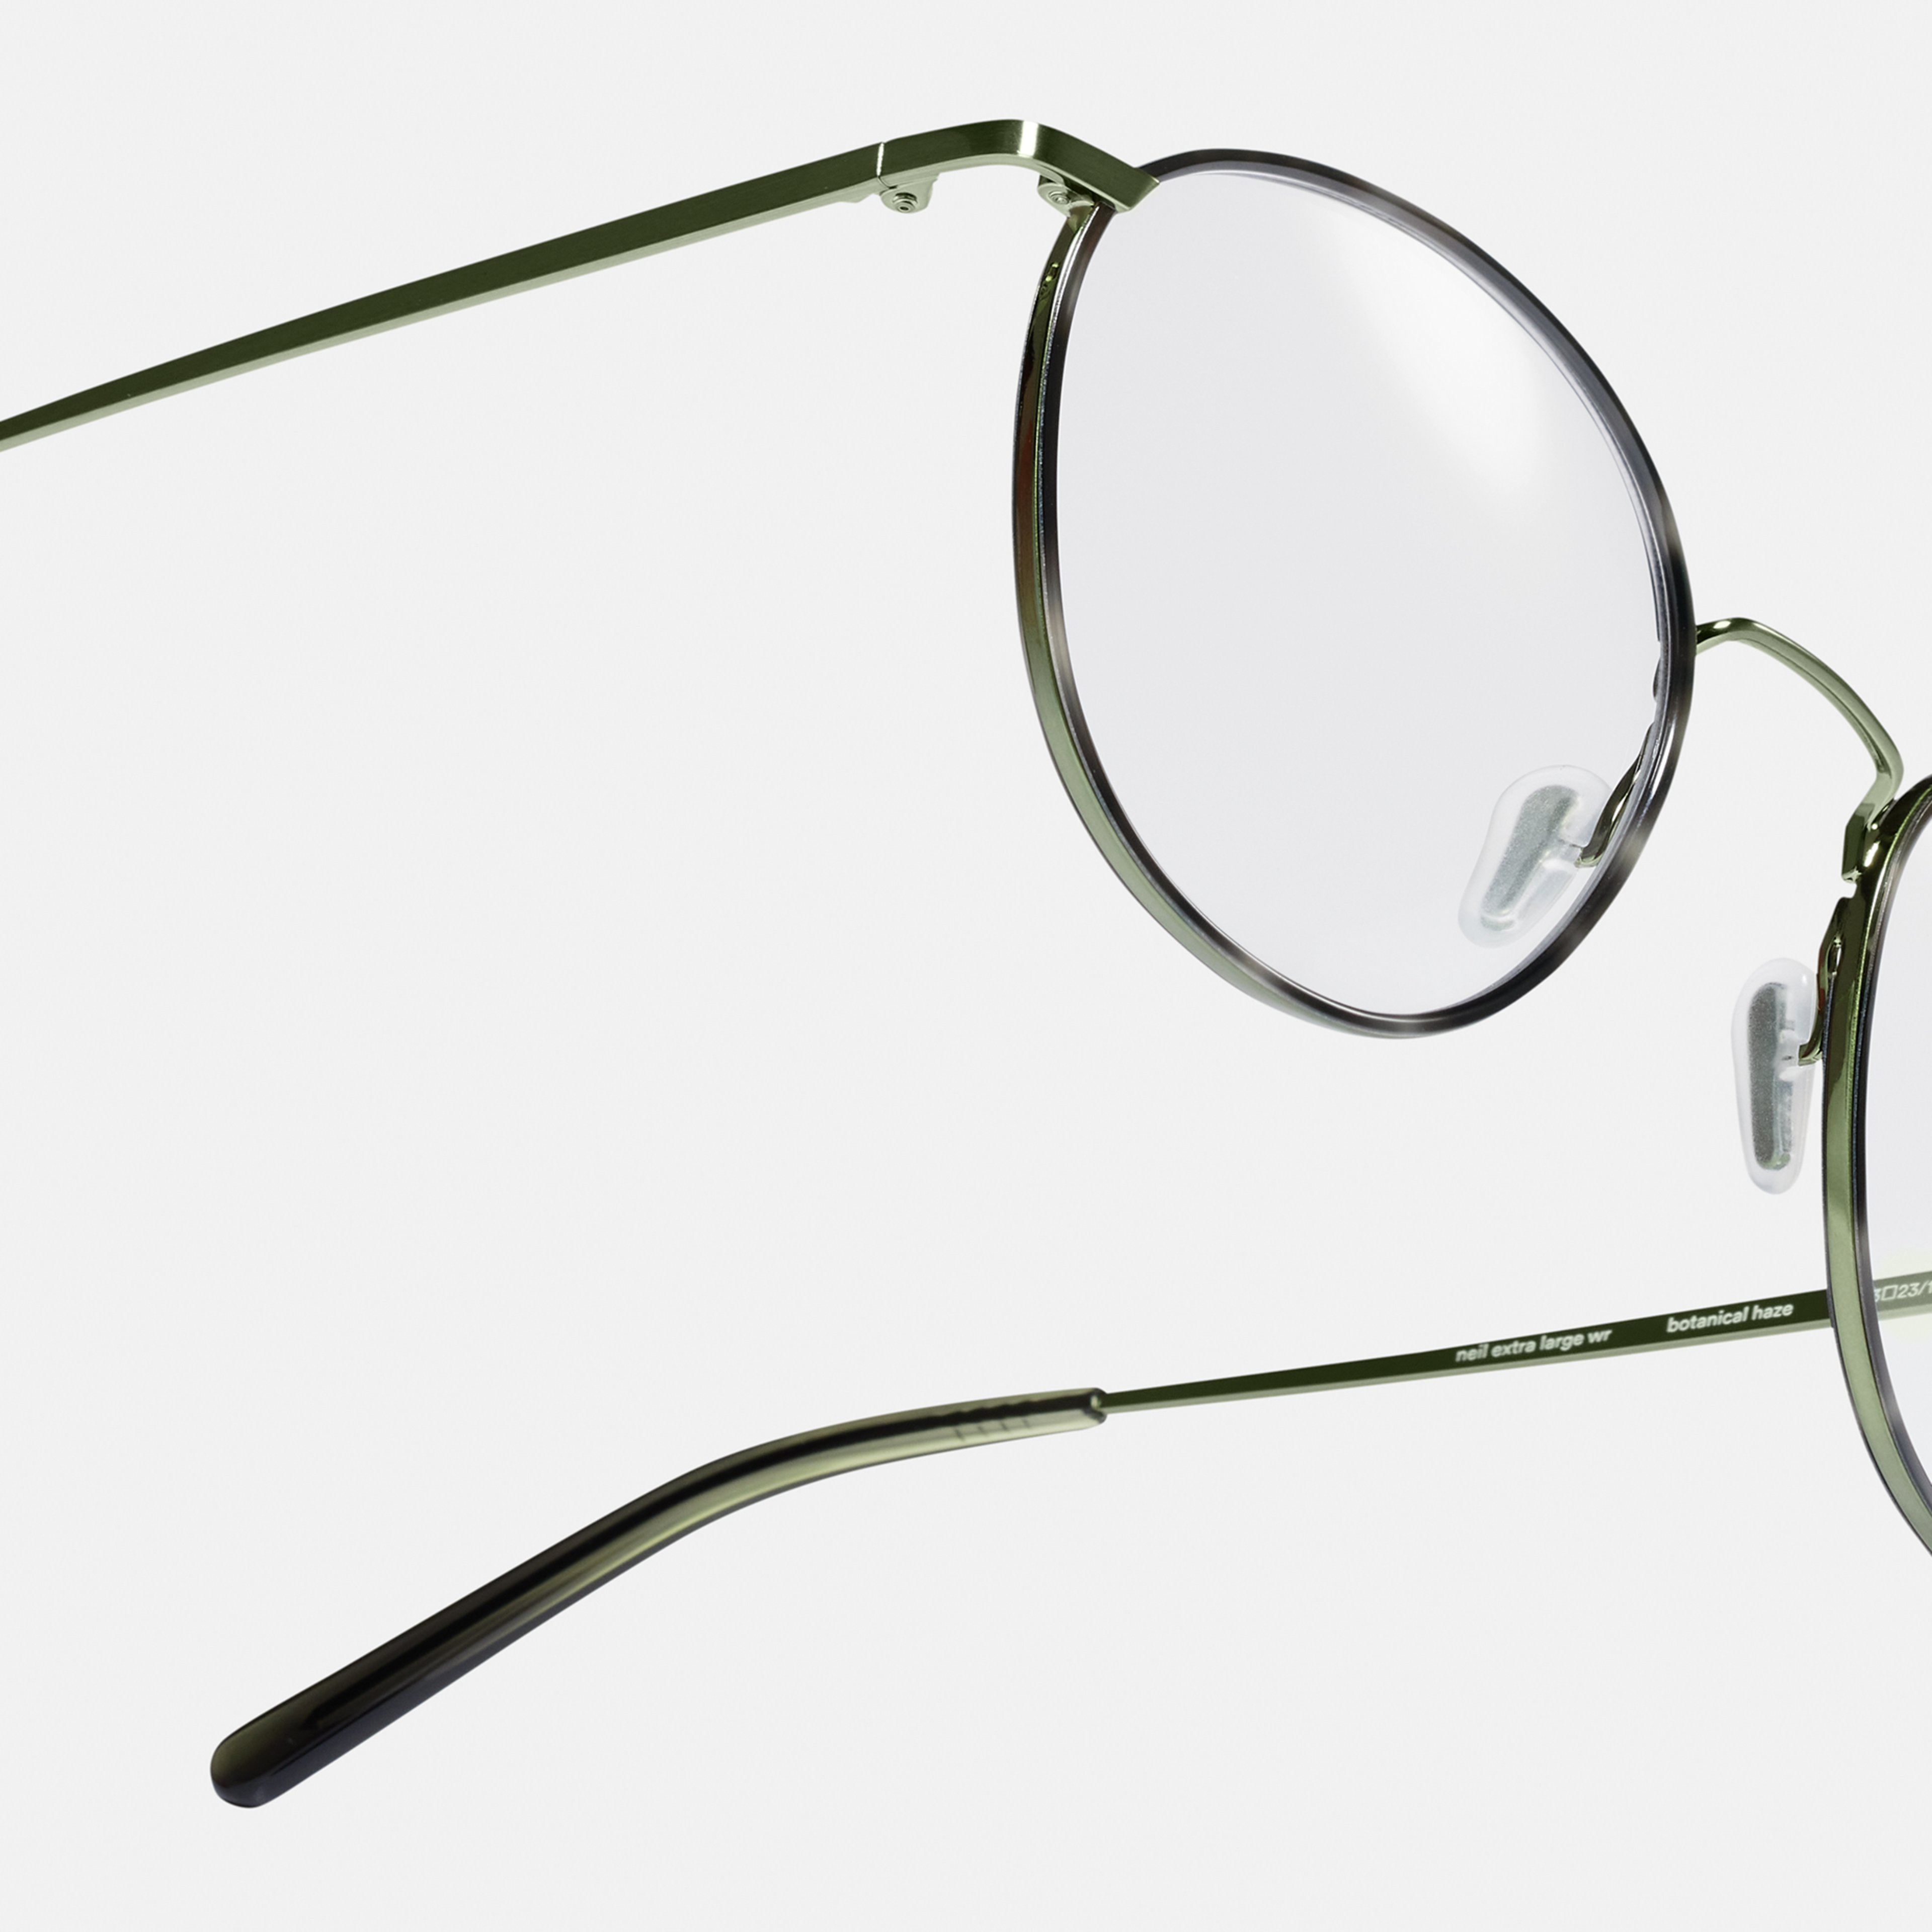 Ace & Tate Glasses | Round Metal in Green